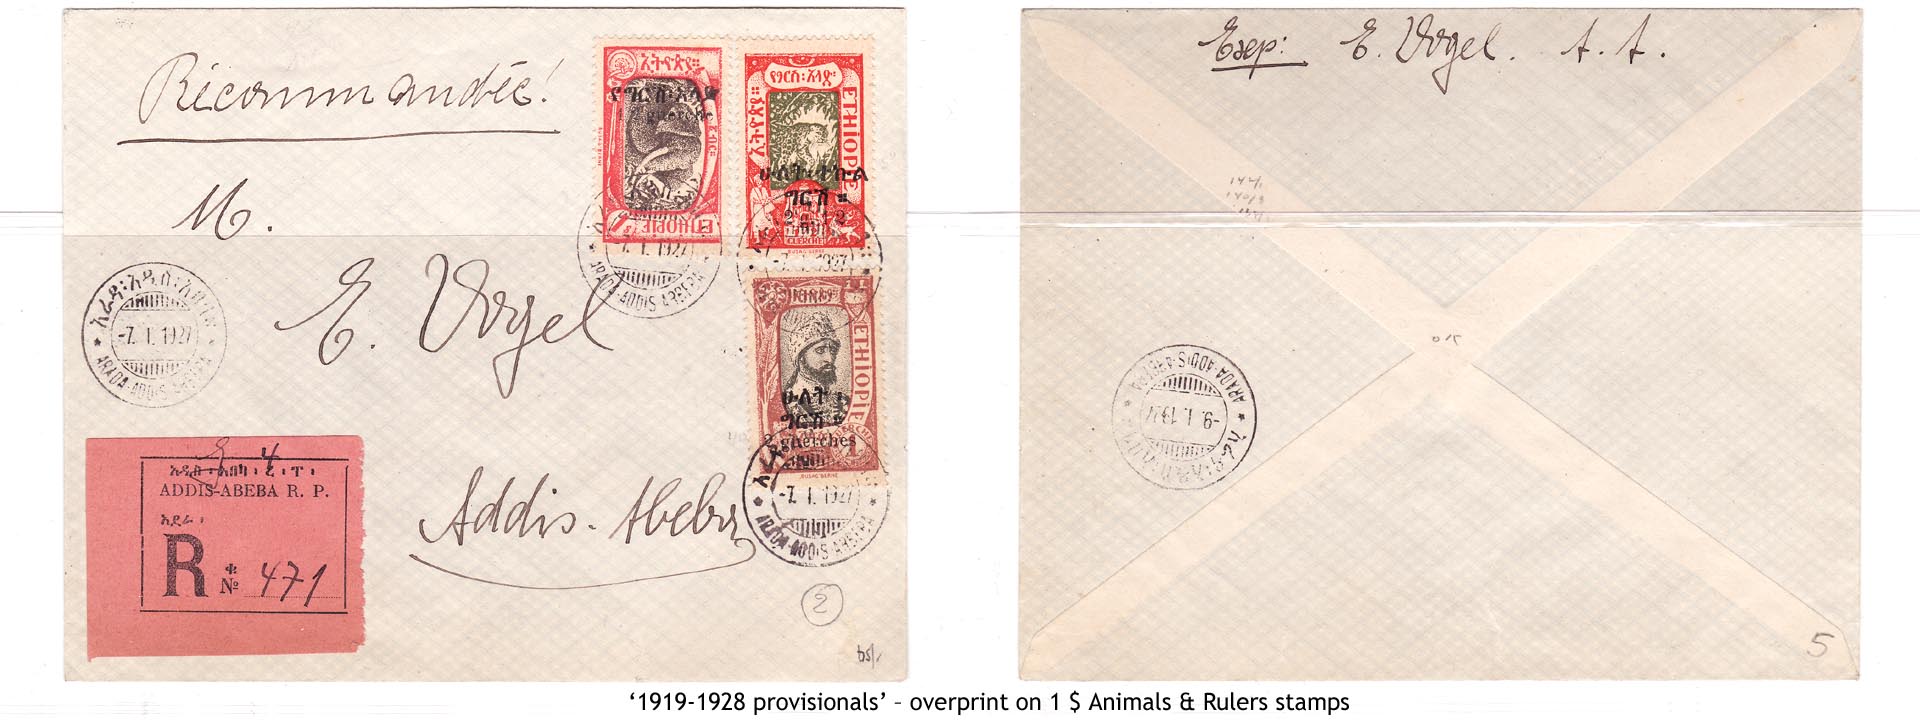 1919-1928 provisionals’ – overprint on 1$ Animals & Rulers stamps